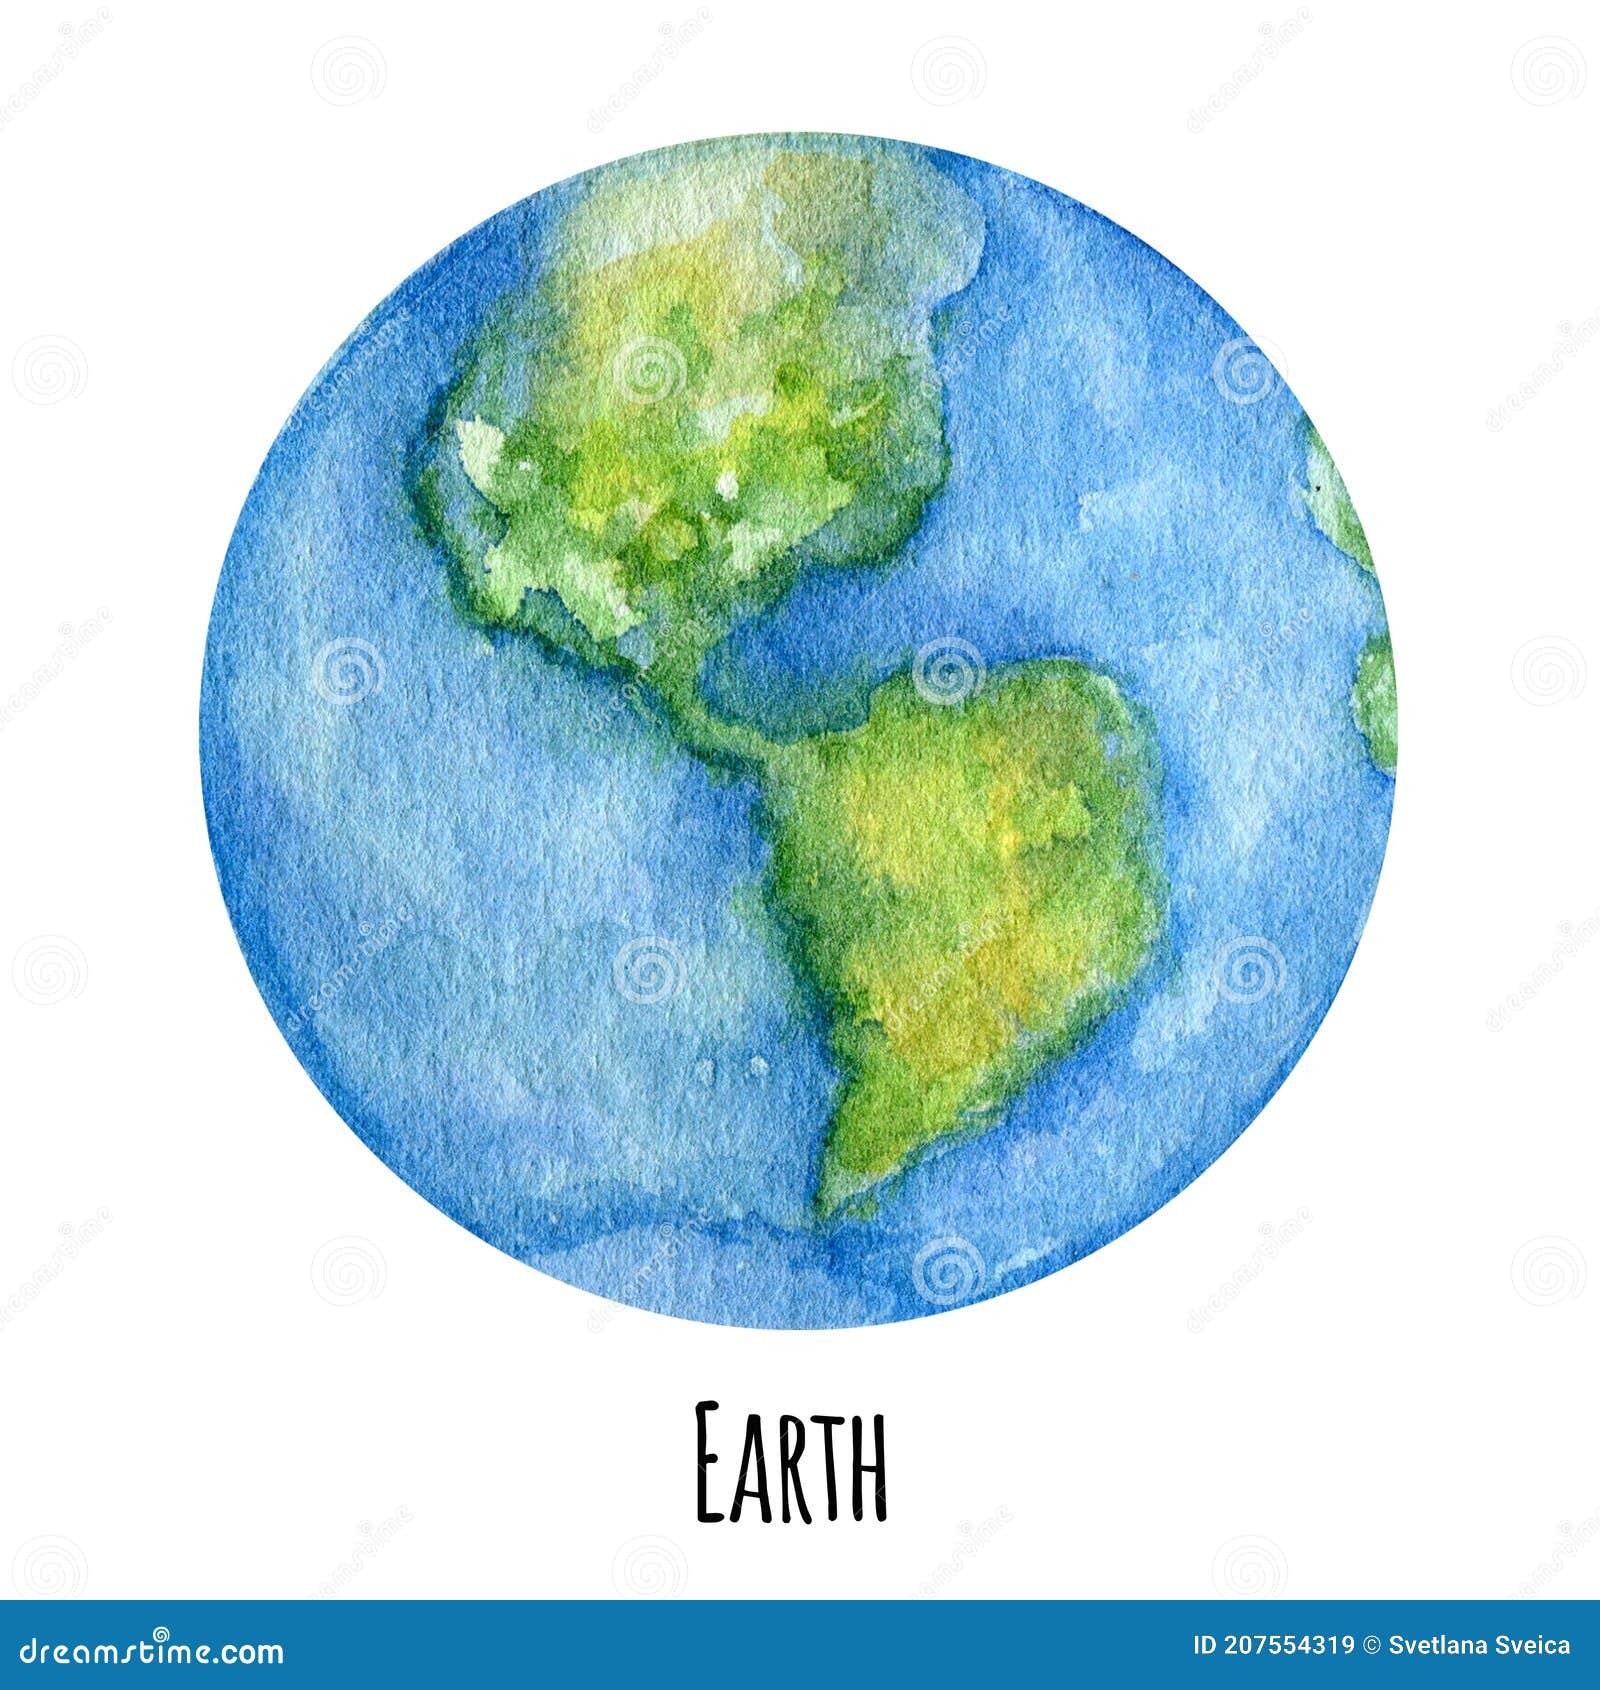 earth planet of the solar system watercolor . globe , world map, ecology green earth day concept on